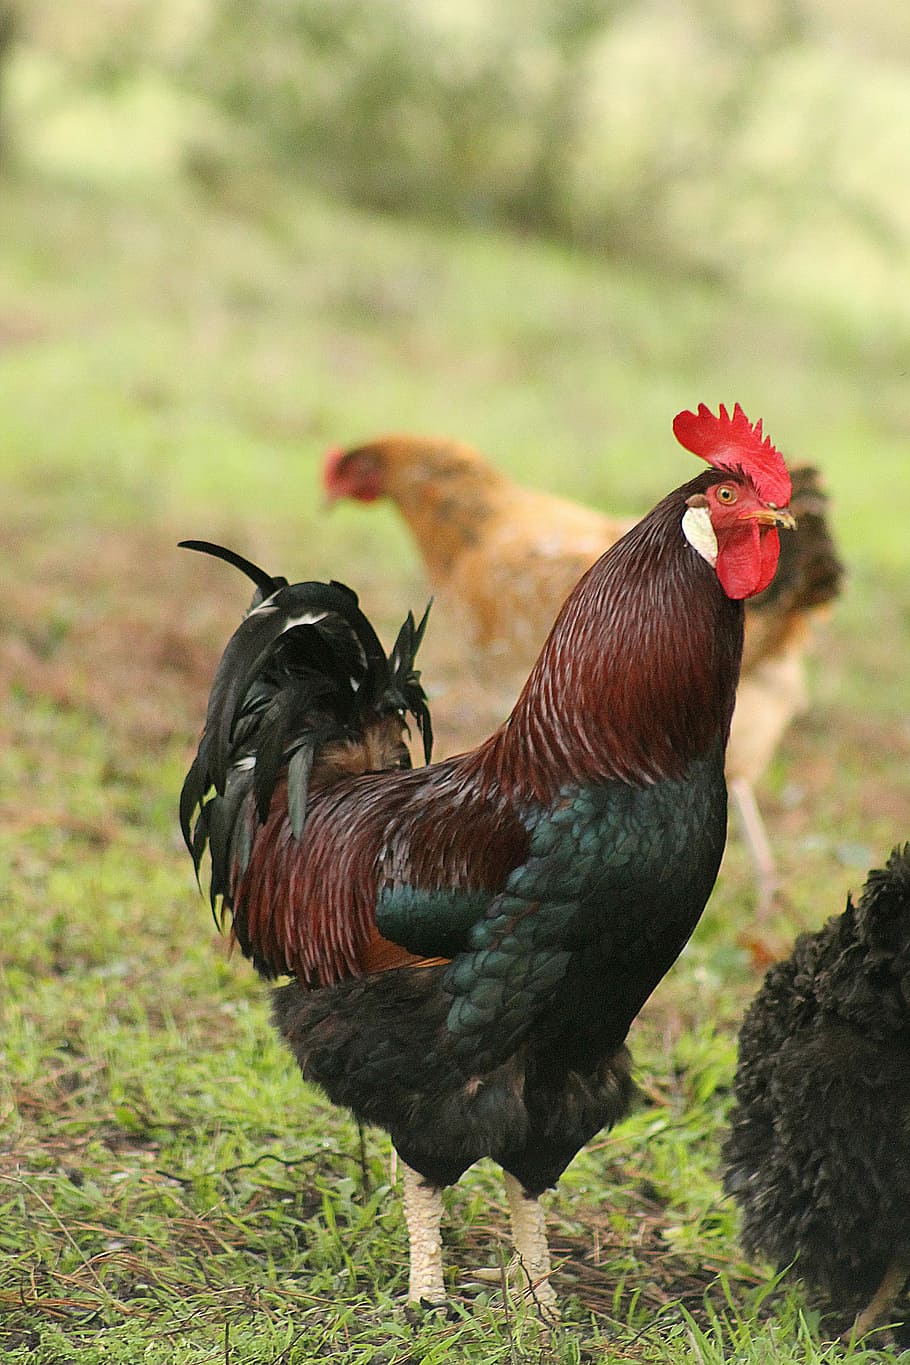 gallo, roosters, chicken coop, animals, domestic fowl, chickens, crest, animal, quiquiriquí, feathers